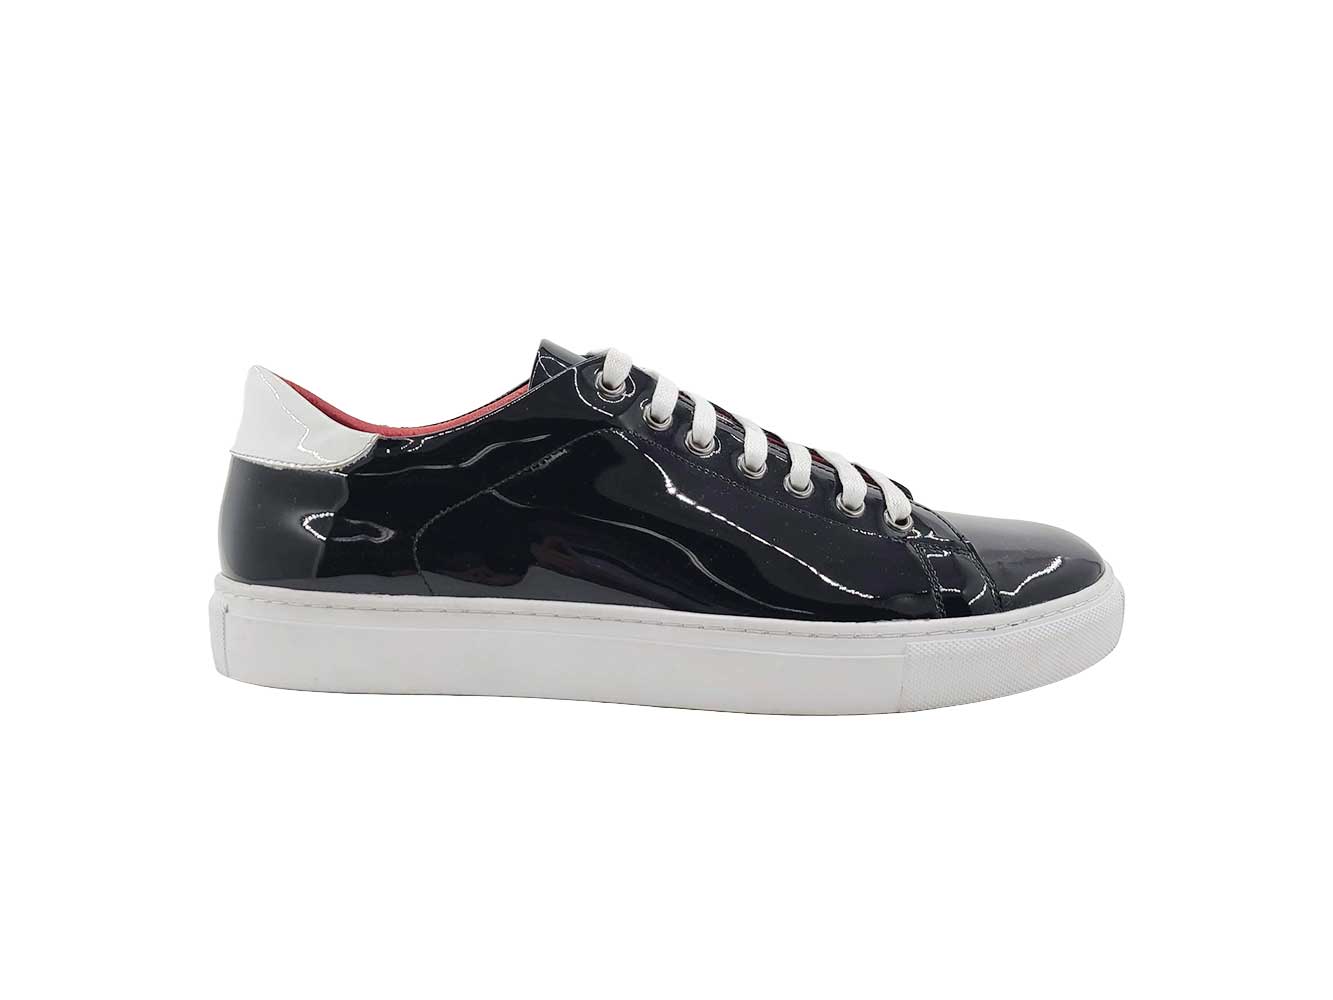 Patent Leather Dress Sneaker